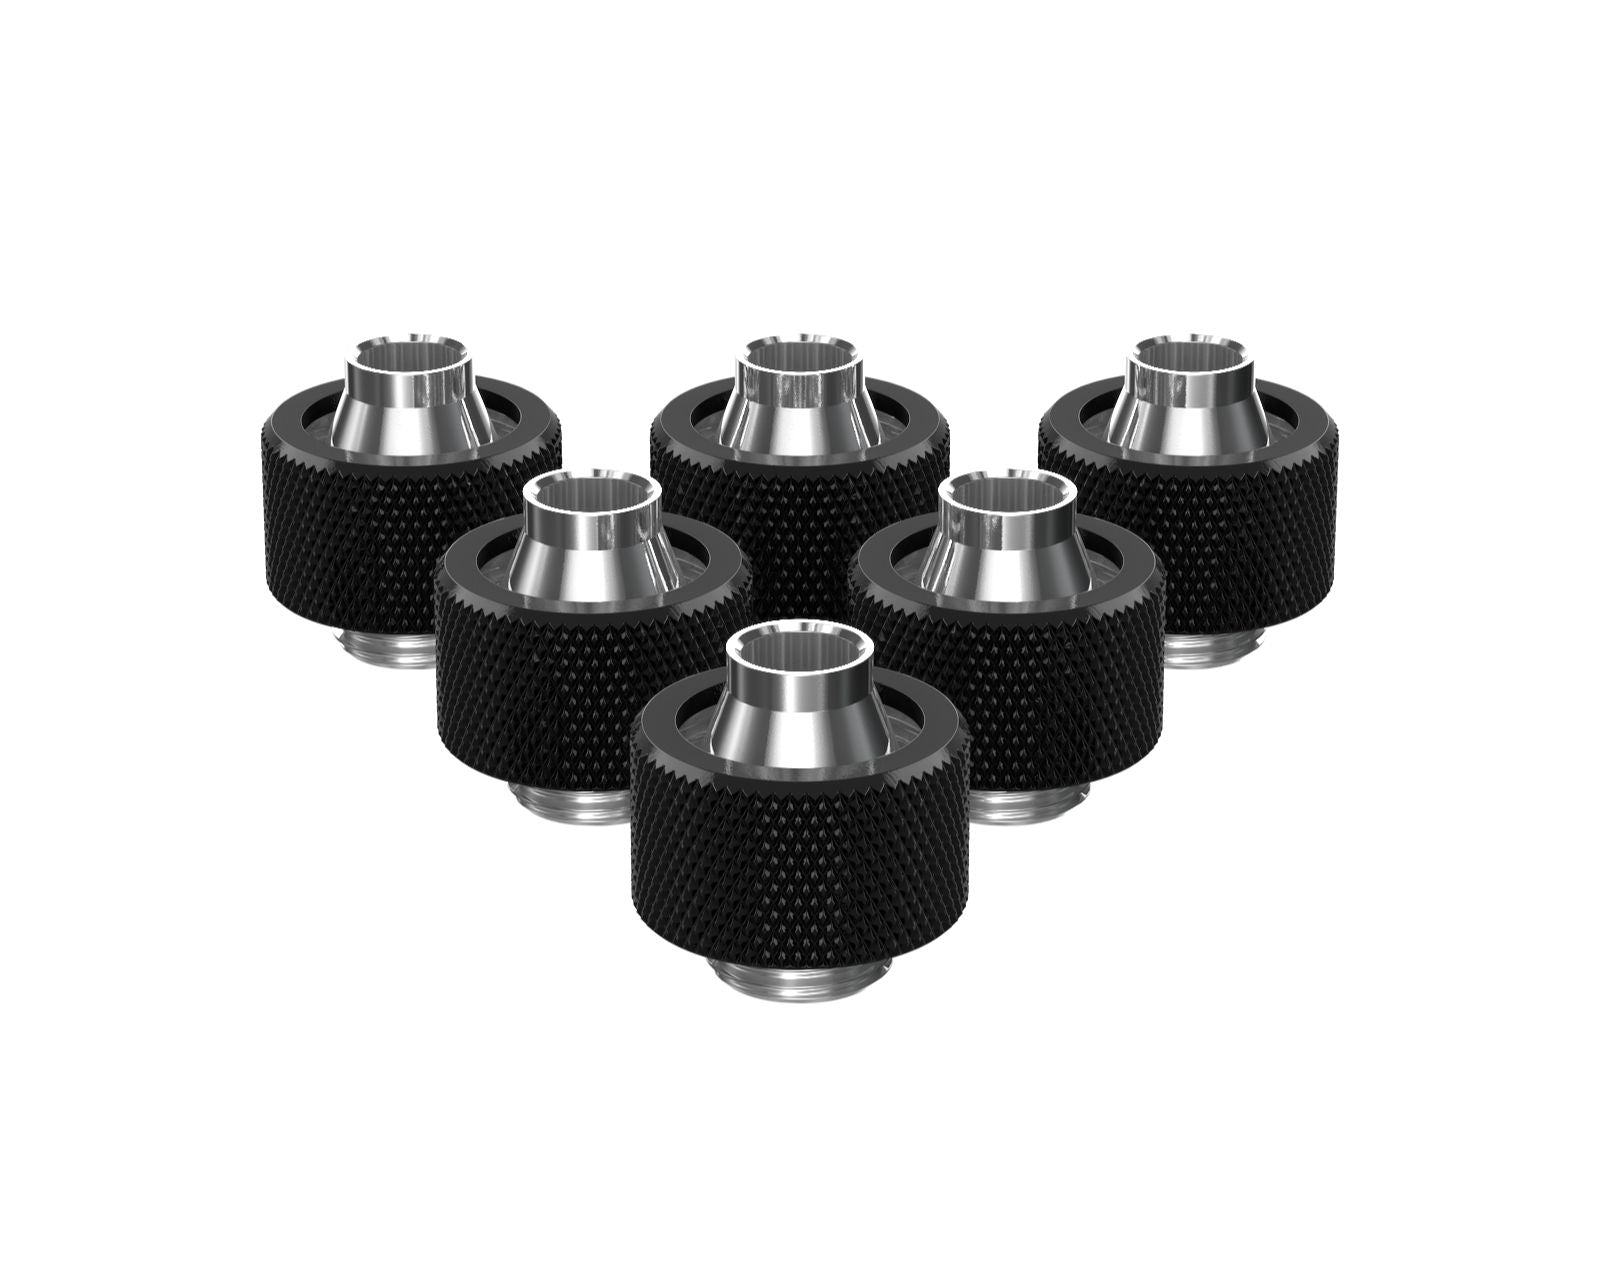 PrimoChill SecureFit SX - Premium Compression Fitting For 3/8in ID x 5/8in OD Flexible Tubing 6 Pack (F-SFSX58-6) - Available in 20+ Colors, Custom Watercooling Loop Ready - Satin Black